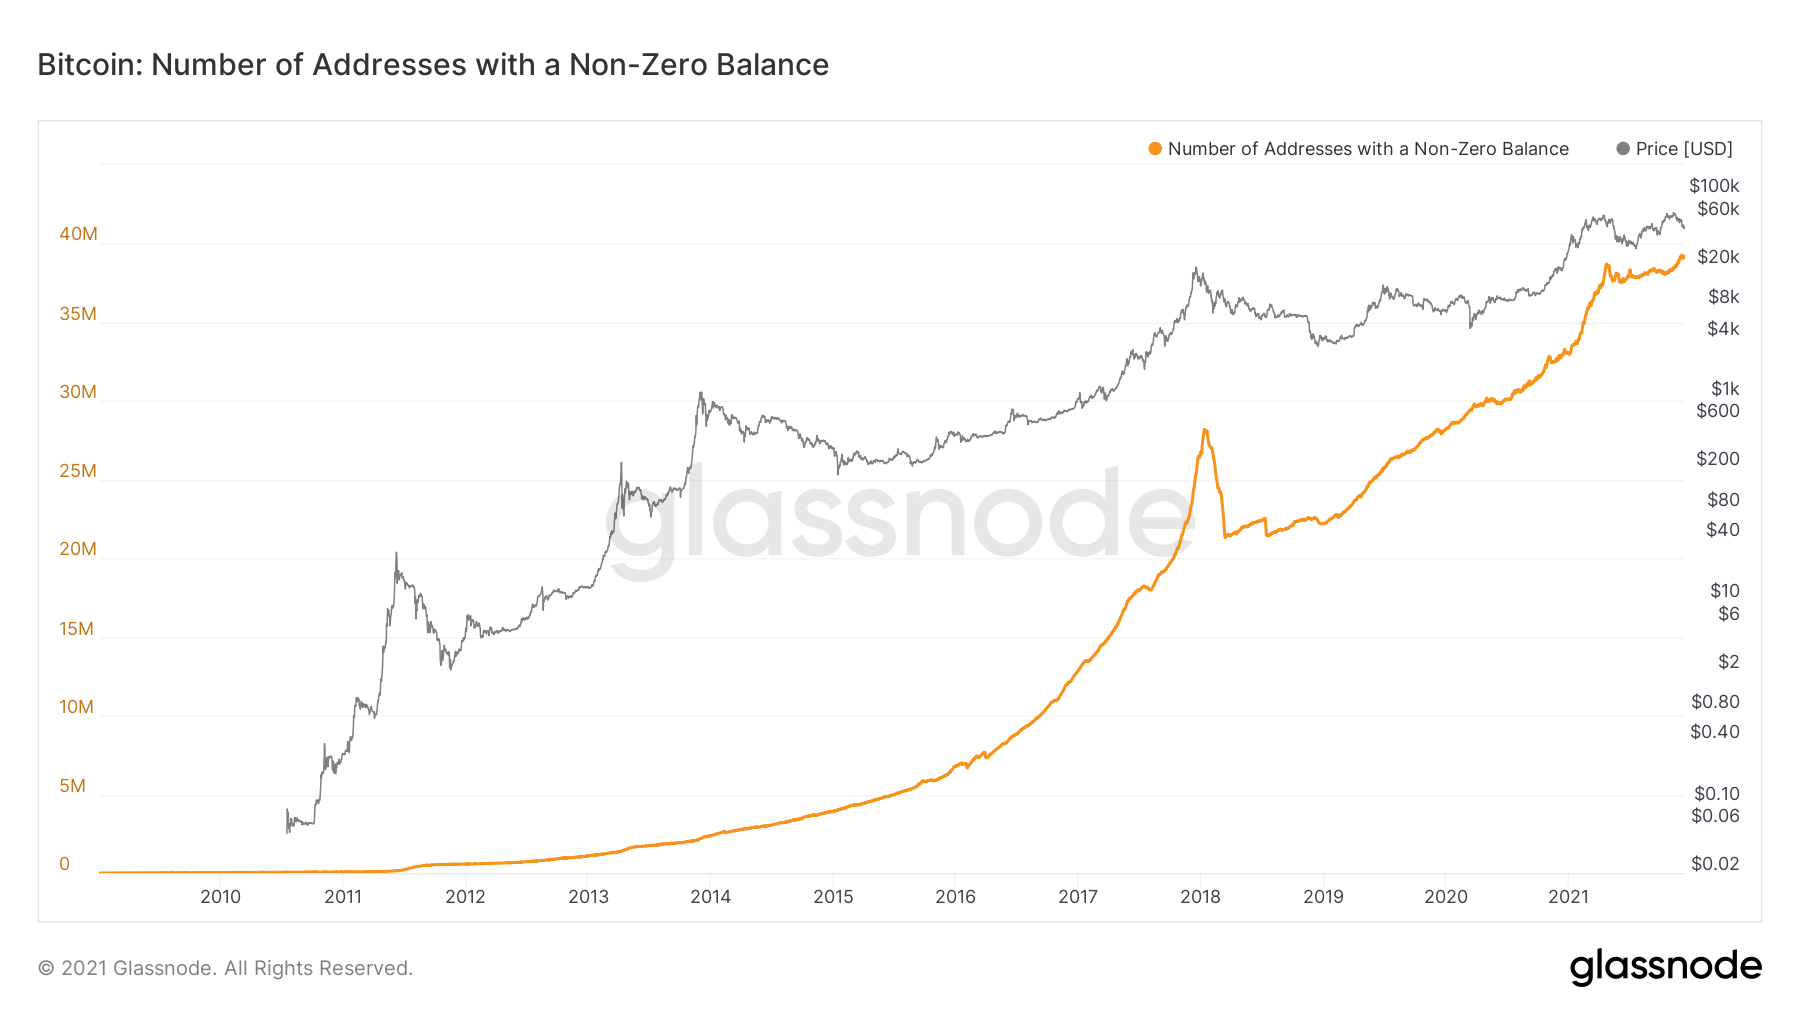 Bitcoin: Number of Addresses with a Non-Zero Balance